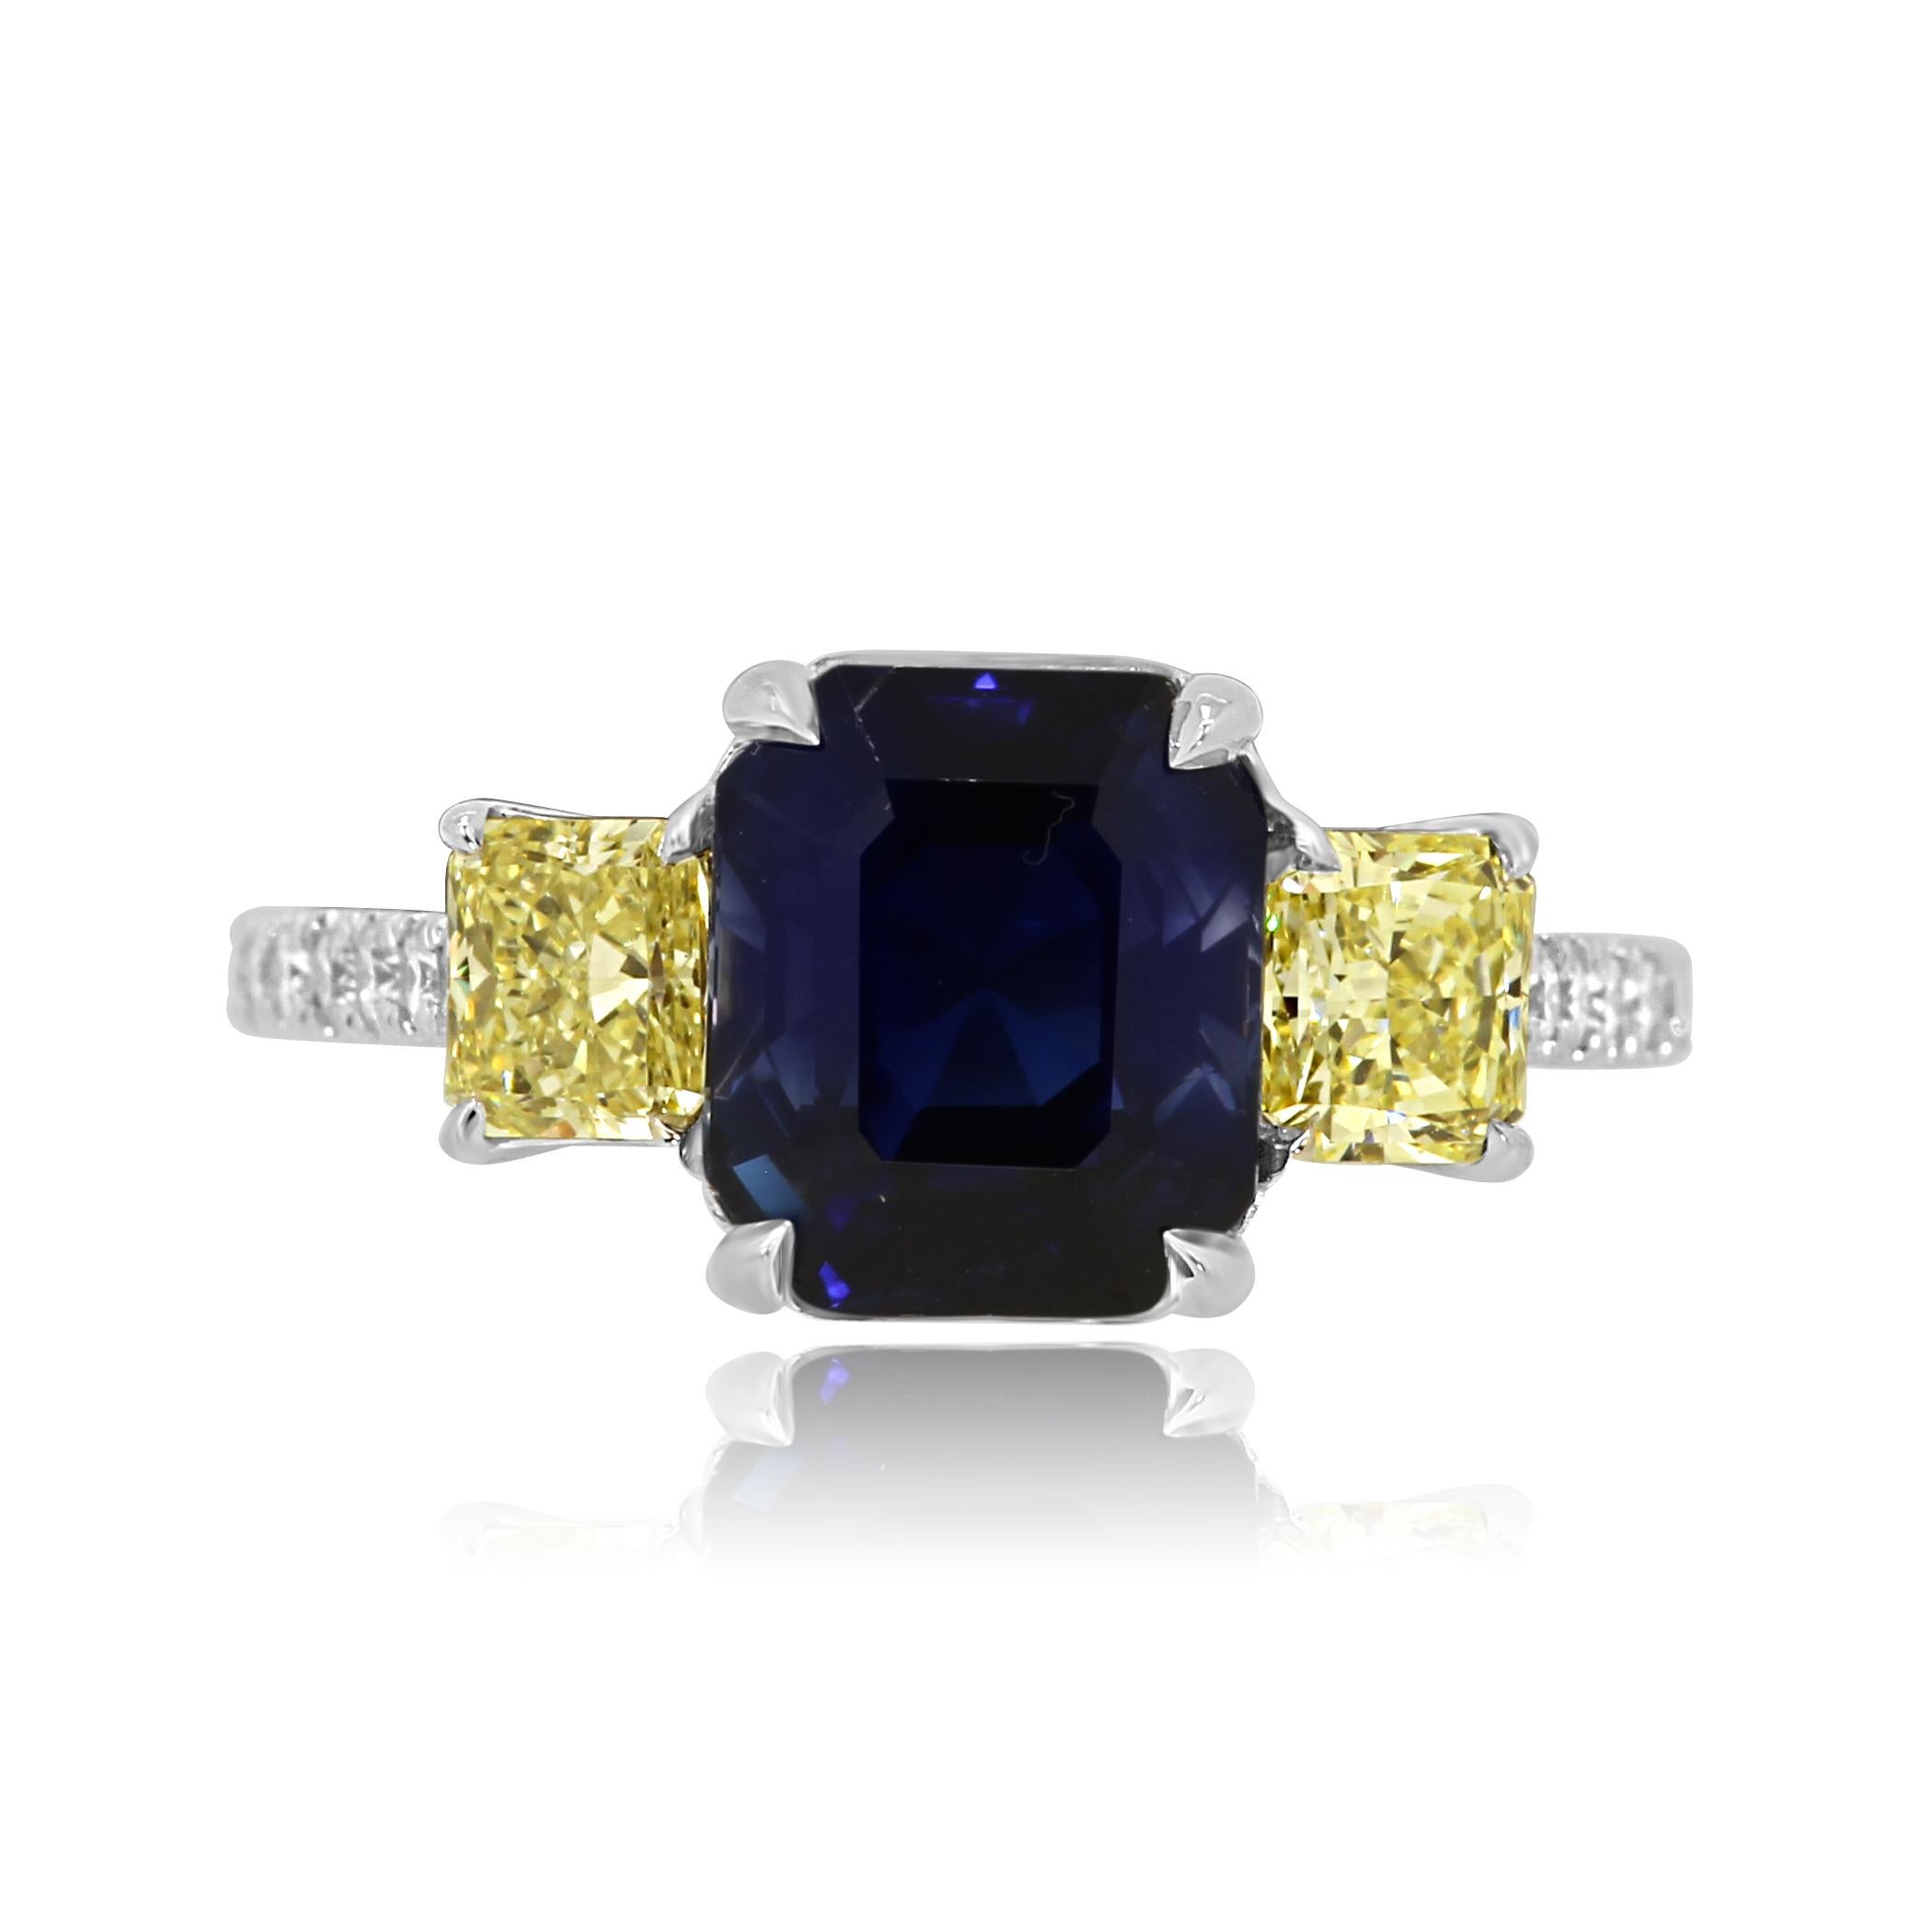 Gorgeous Royal Blue GIA Certified 4.94 Carat NO HEAT Emerald Cut Madagascar Blue Sapphire Flanked with 2 Natural Fancy Yellow Radiant Cut Diamonds 0.86 Carat on the side set with white round diamonds 0.38 Carat on the Shank in Stunning 18K White